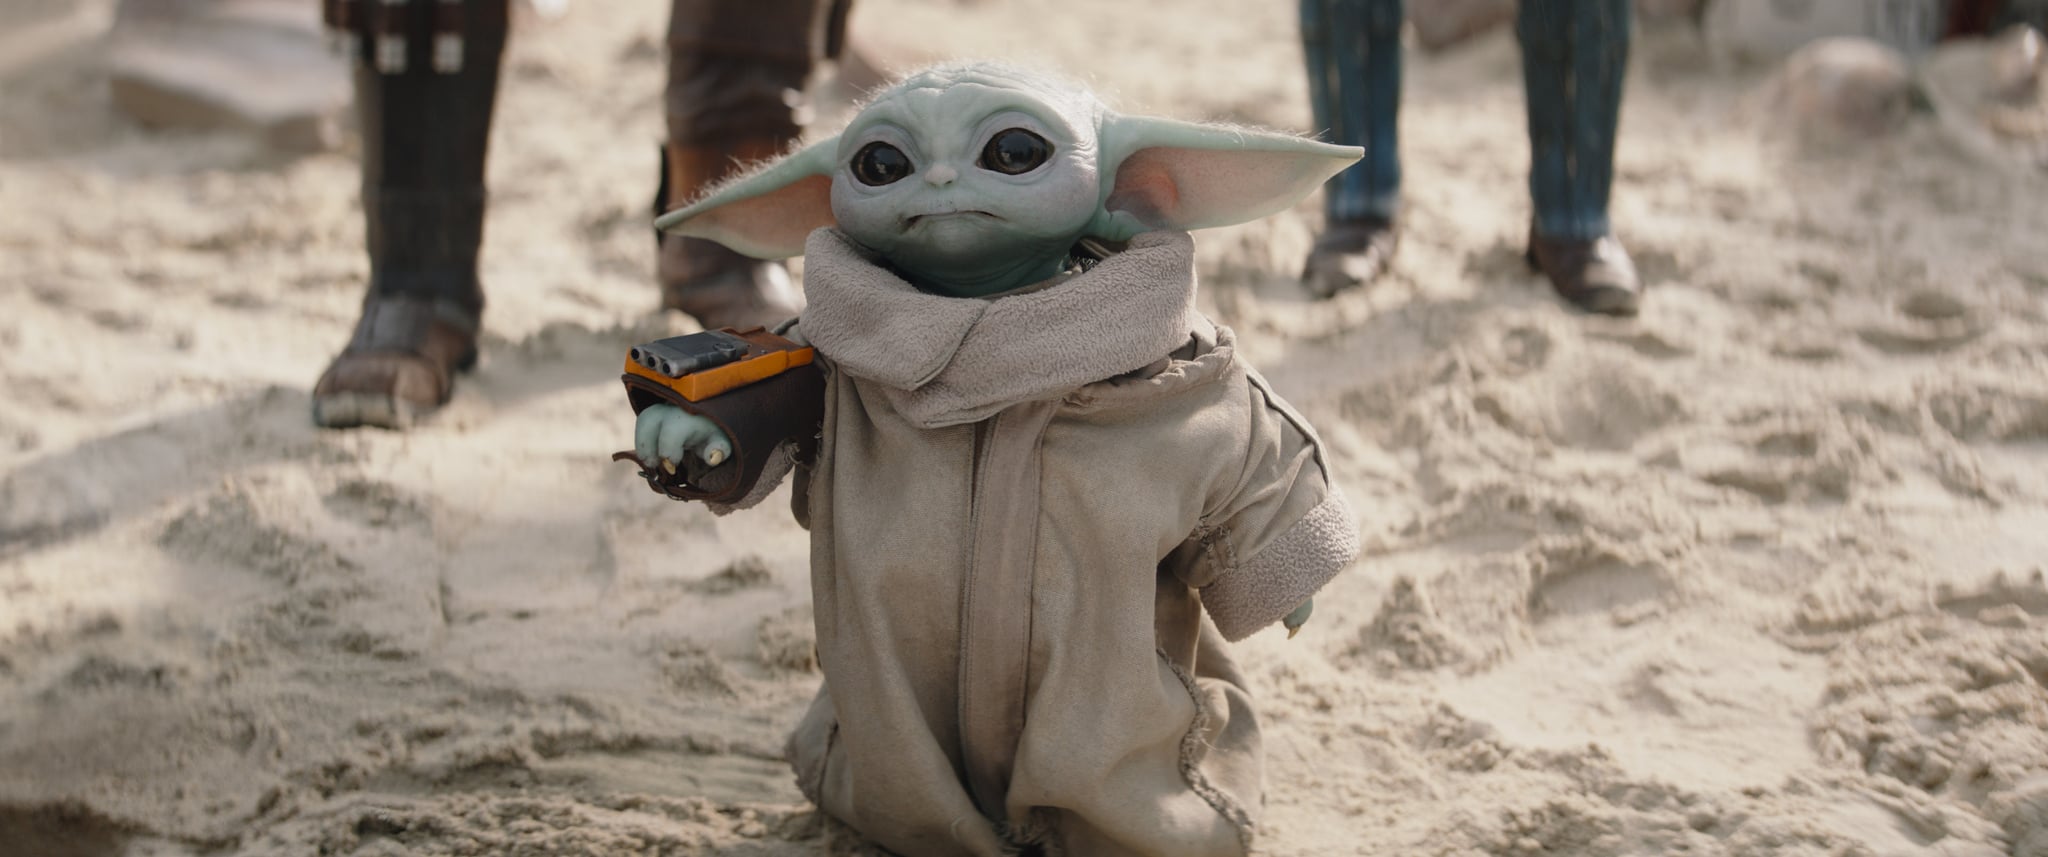 Grogu in Lucasfilm's THE MANDALORIAN, season three, exclusively on Disney+. ©2023 Lucasfilm Ltd. & TM. All Rights Reserved.